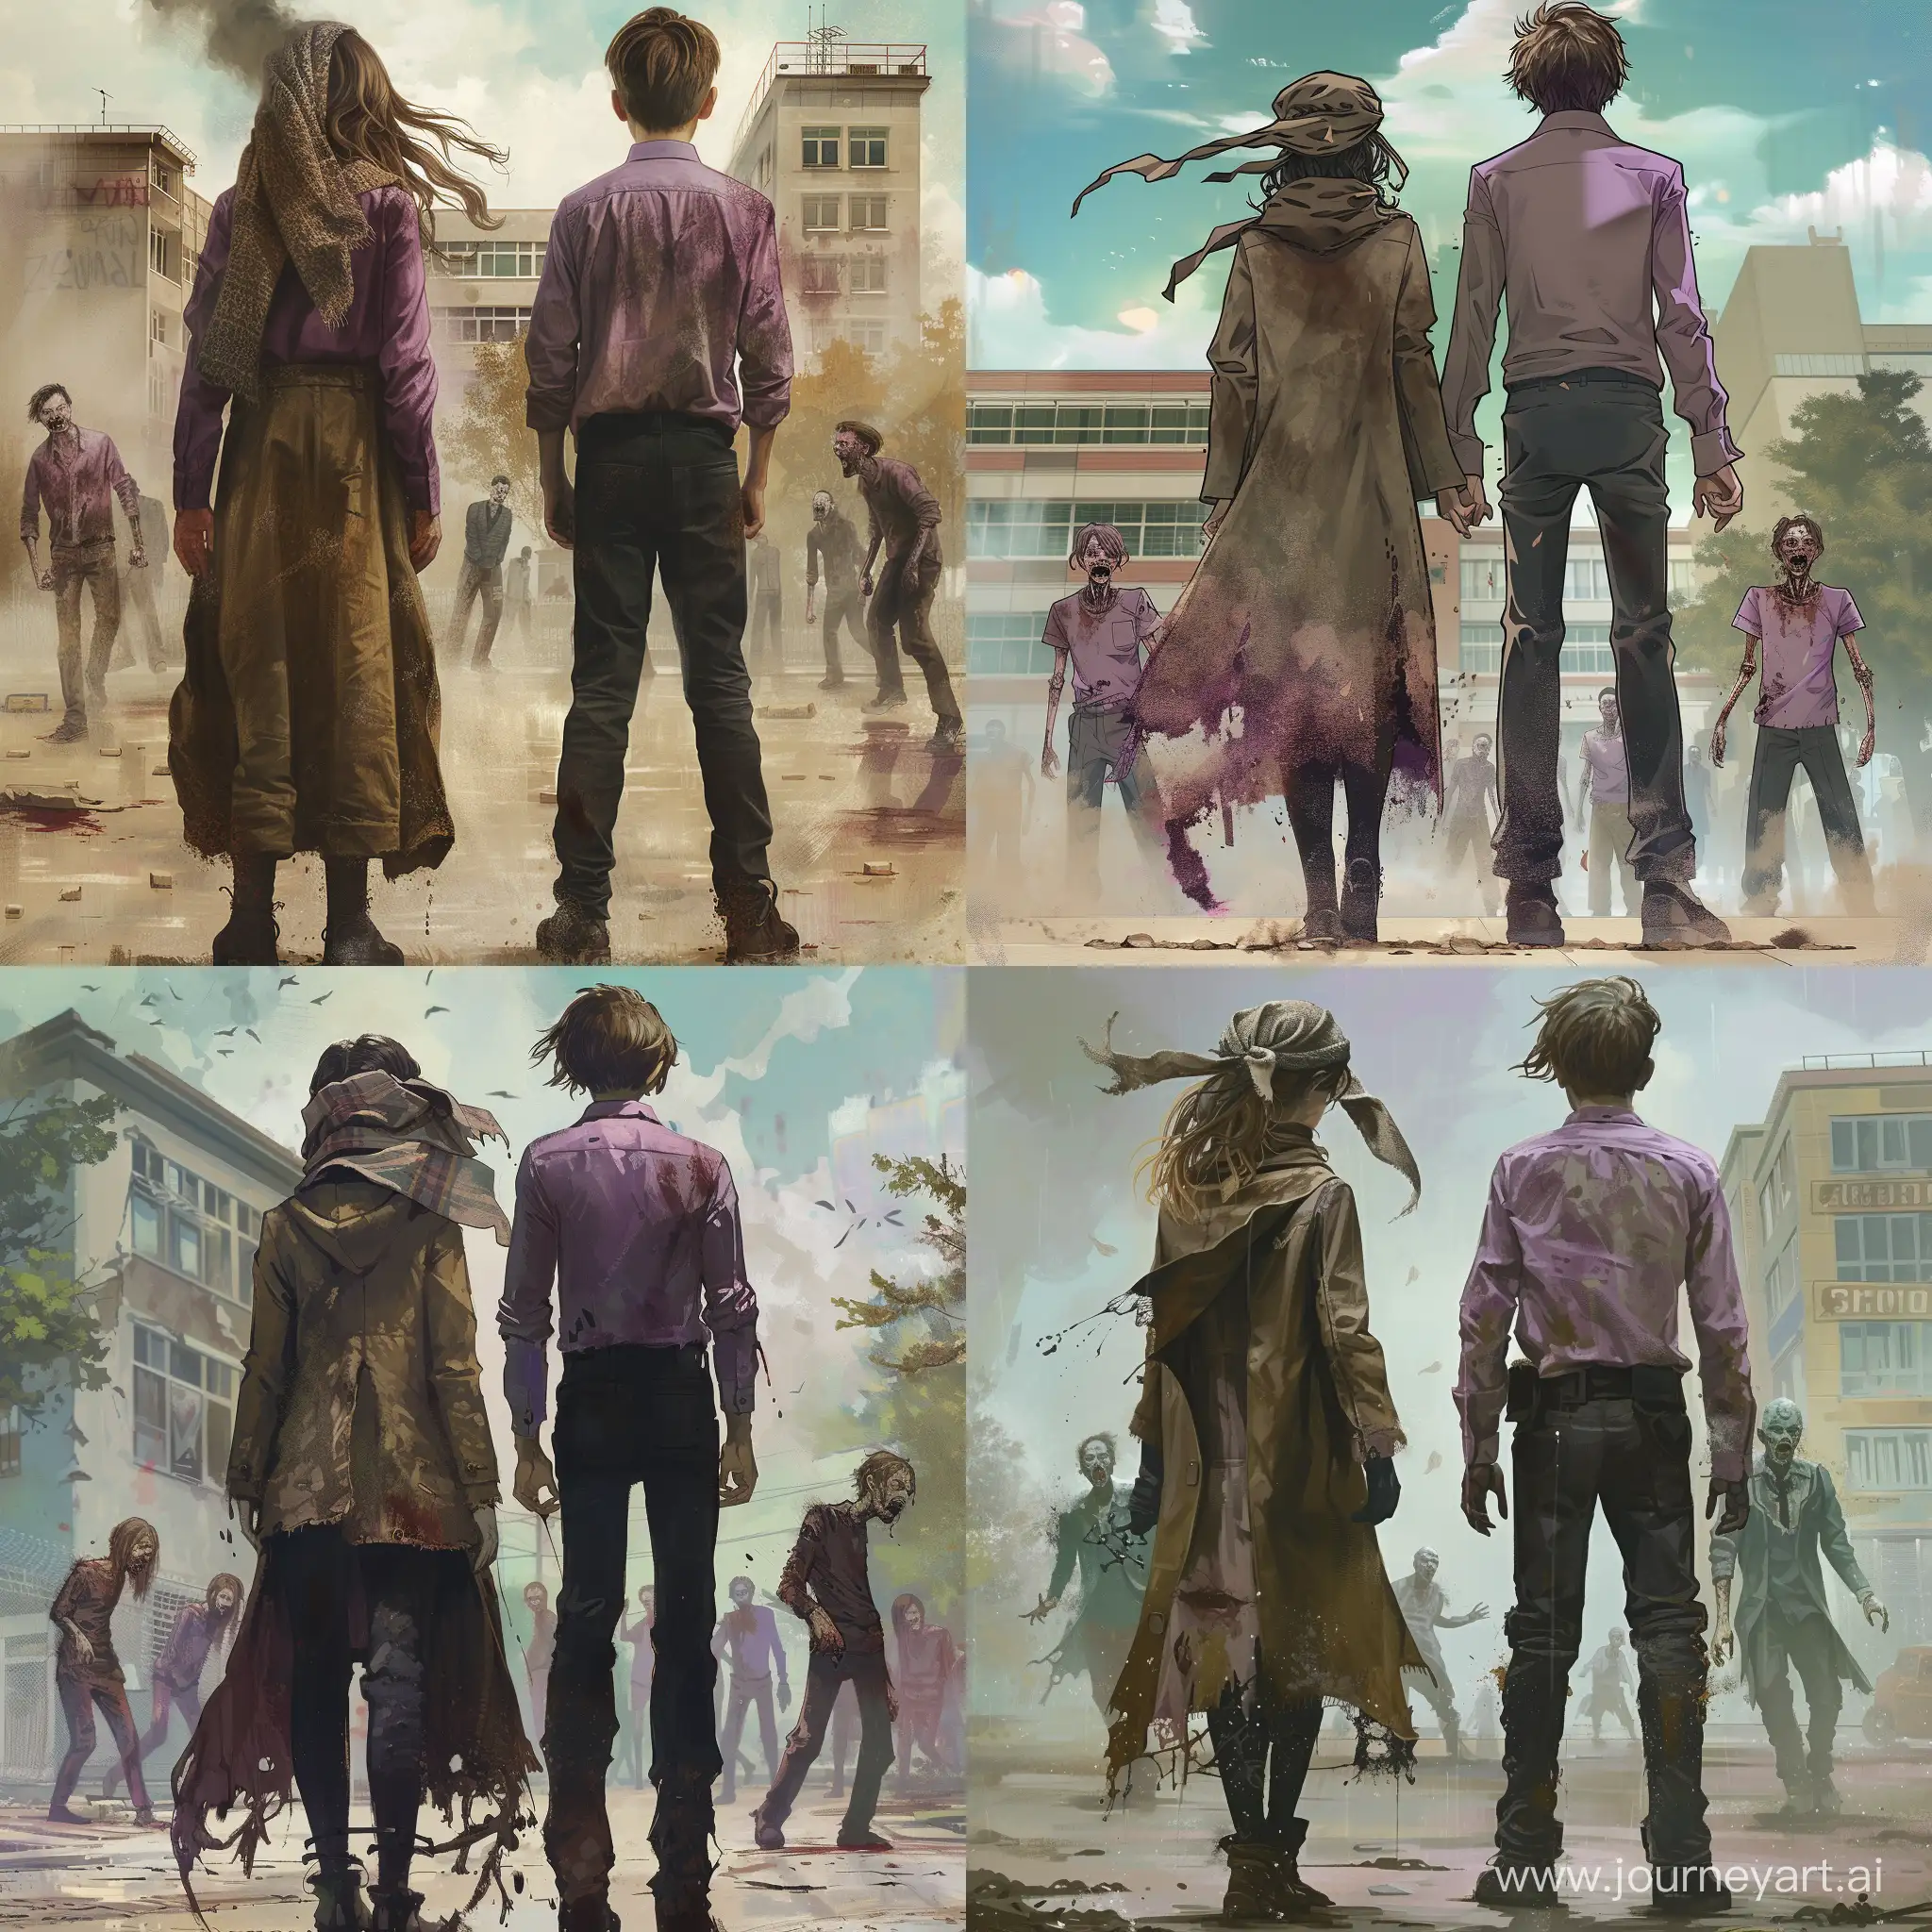 A 16-years-old girl from the back with a scarf on her head and a long block coat that has become dusty , and a tall 18-years-old boy from the back with a lilac shirt , black pants and black shoes and brown hair.Zombies and a school building can be seen in the background.to be and it is daytime.The faces of the boy and girl are not visible.